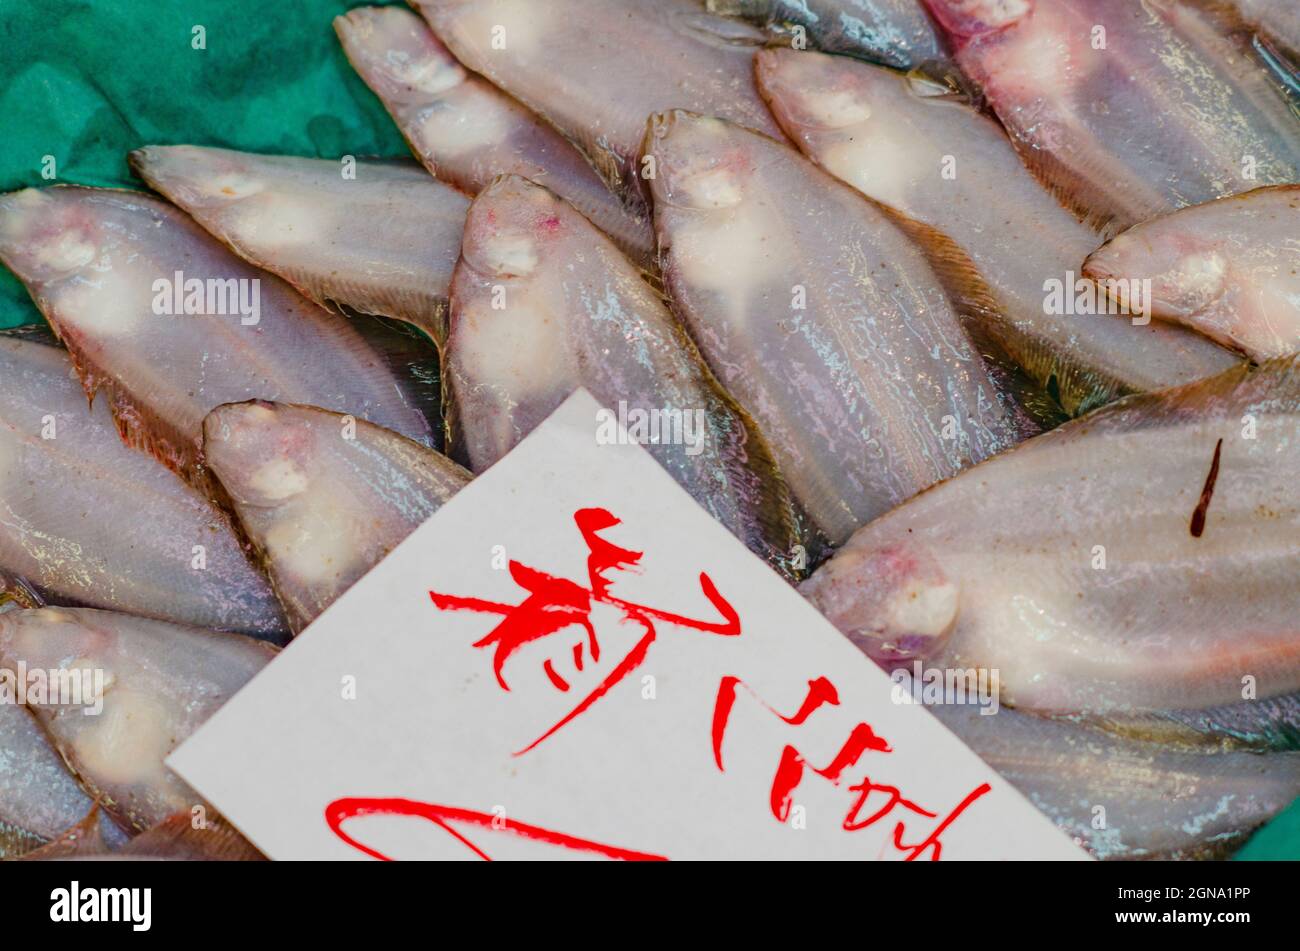 Japanese calligraphy, Sign, Price, Fish market, Traditional, Kanji characters Stock Photo